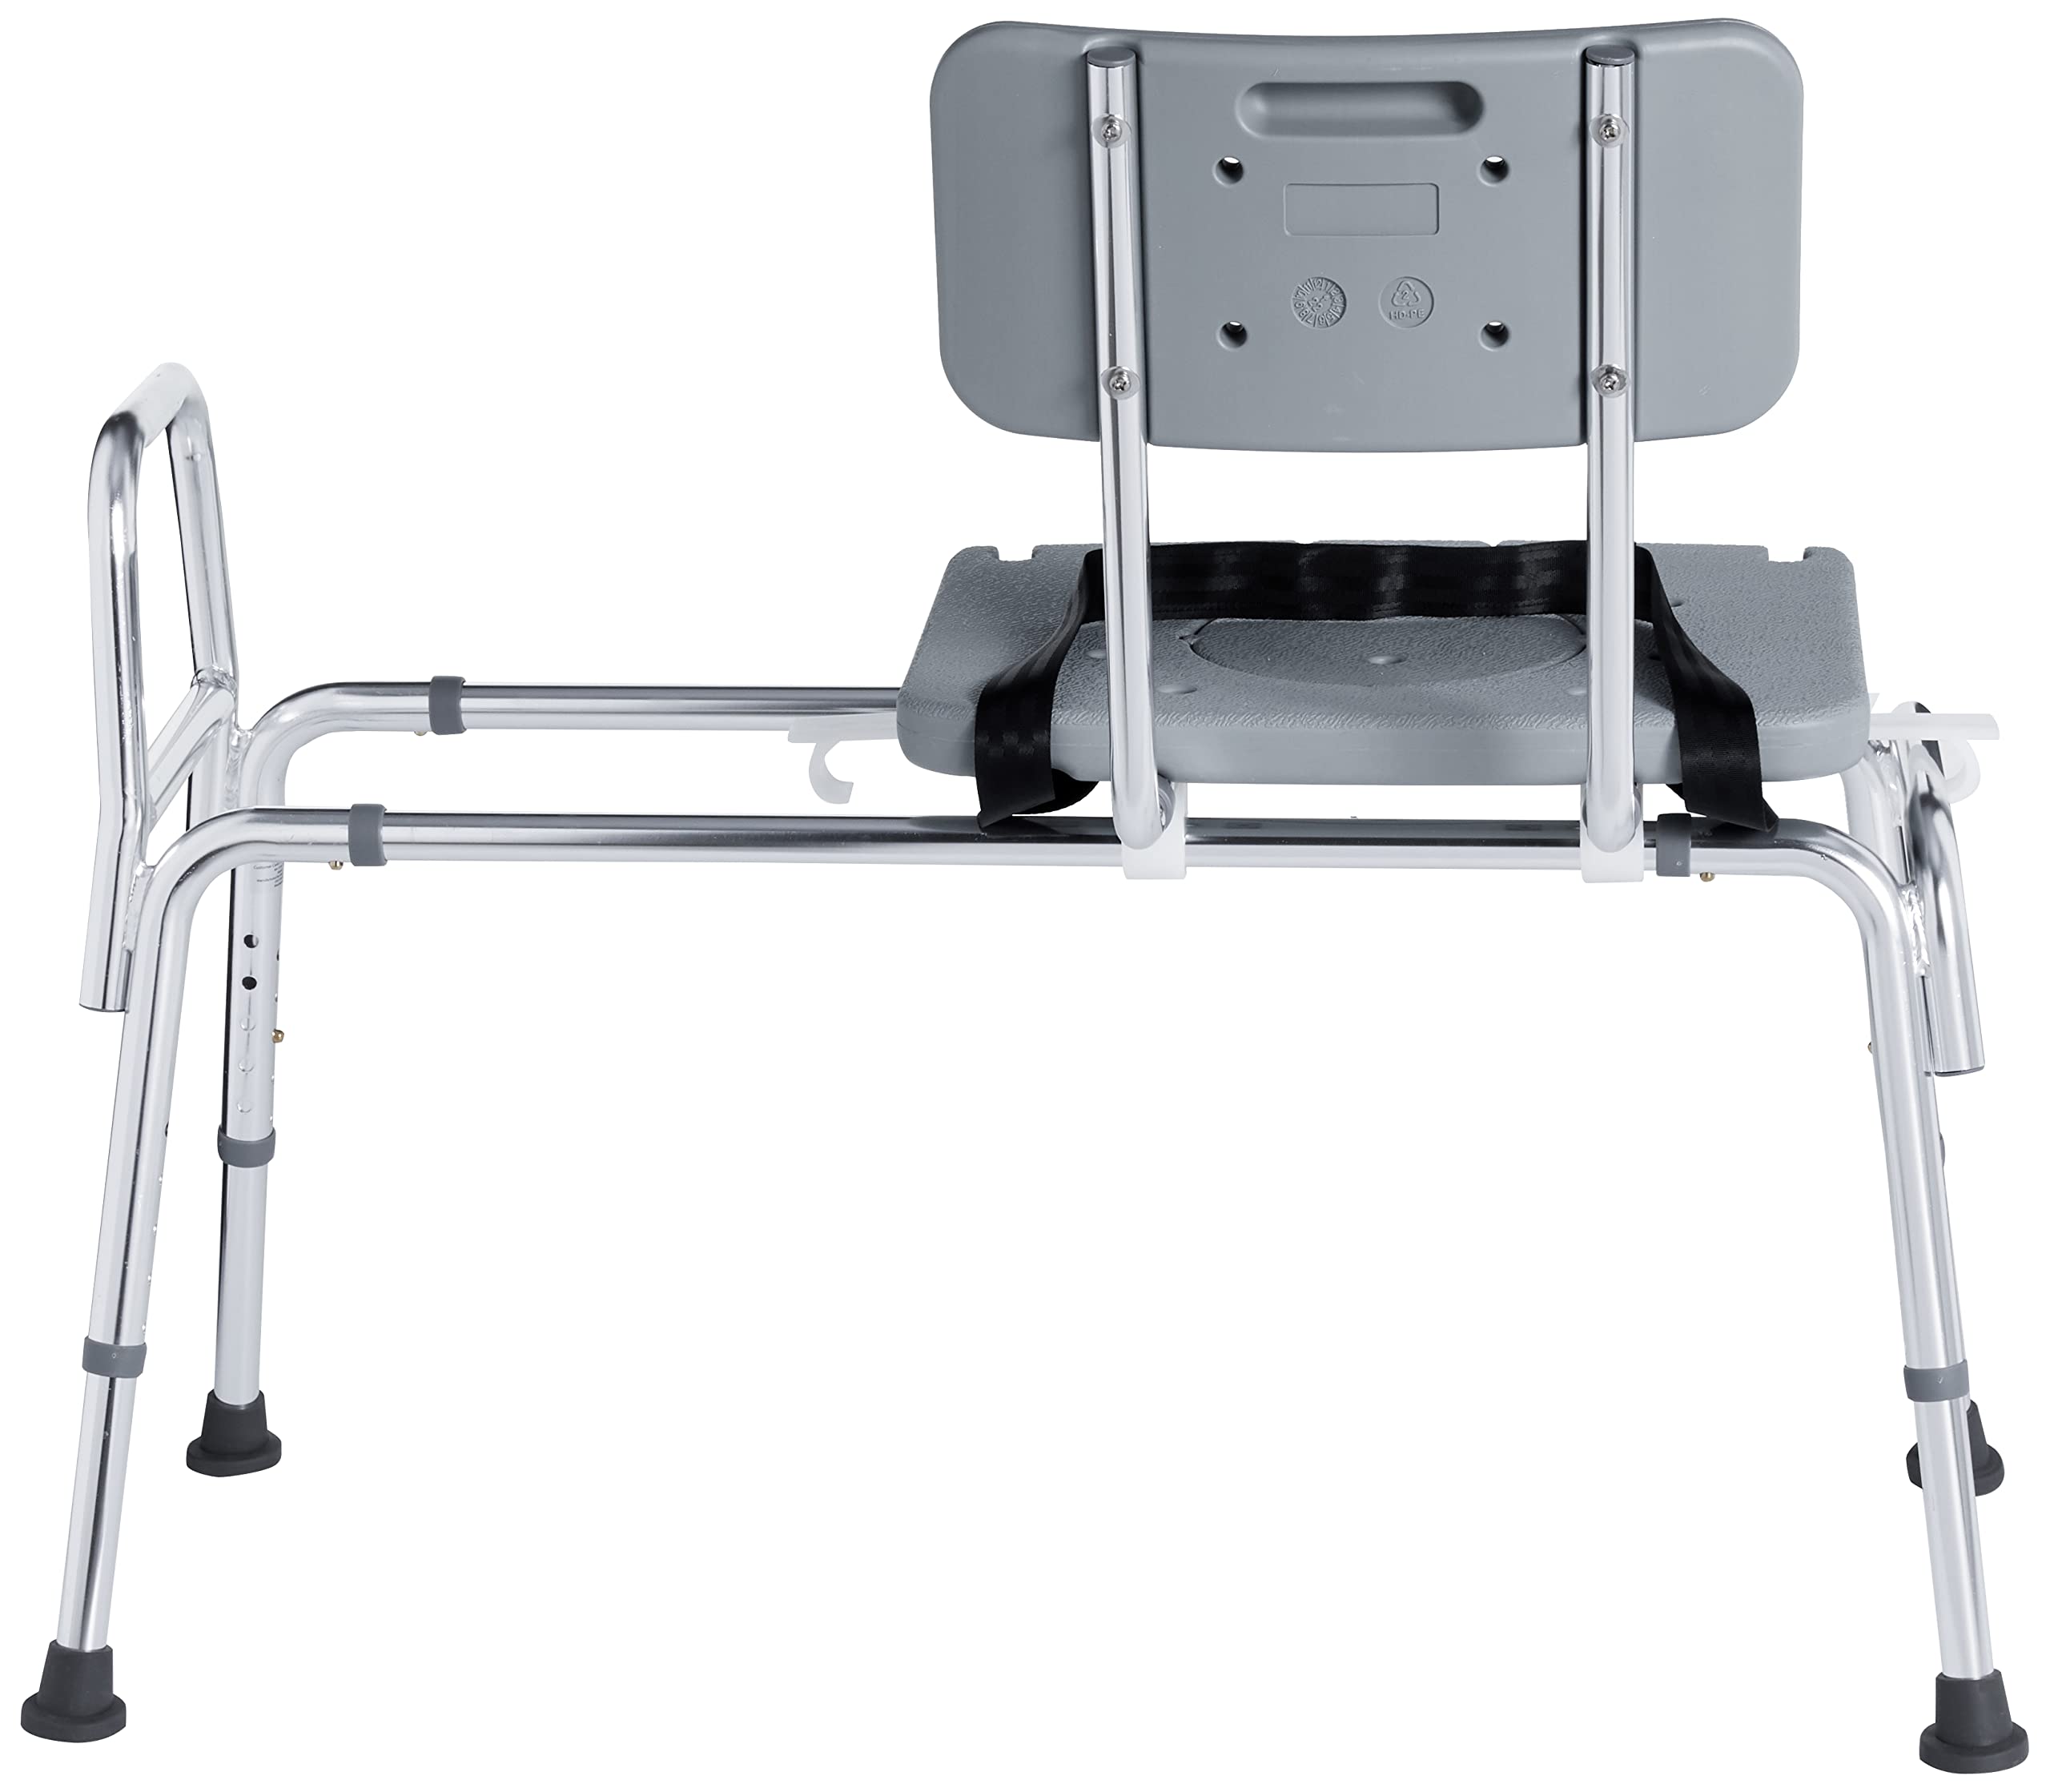 DMI Tub Transfer Bench and Sliding Shower Chair, Made of Heavy Duty Non Slip Aluminum, Seat with Adjustable Height & Cut Out Access, Holding Weight Capacity up to 400 Lbs, Gray